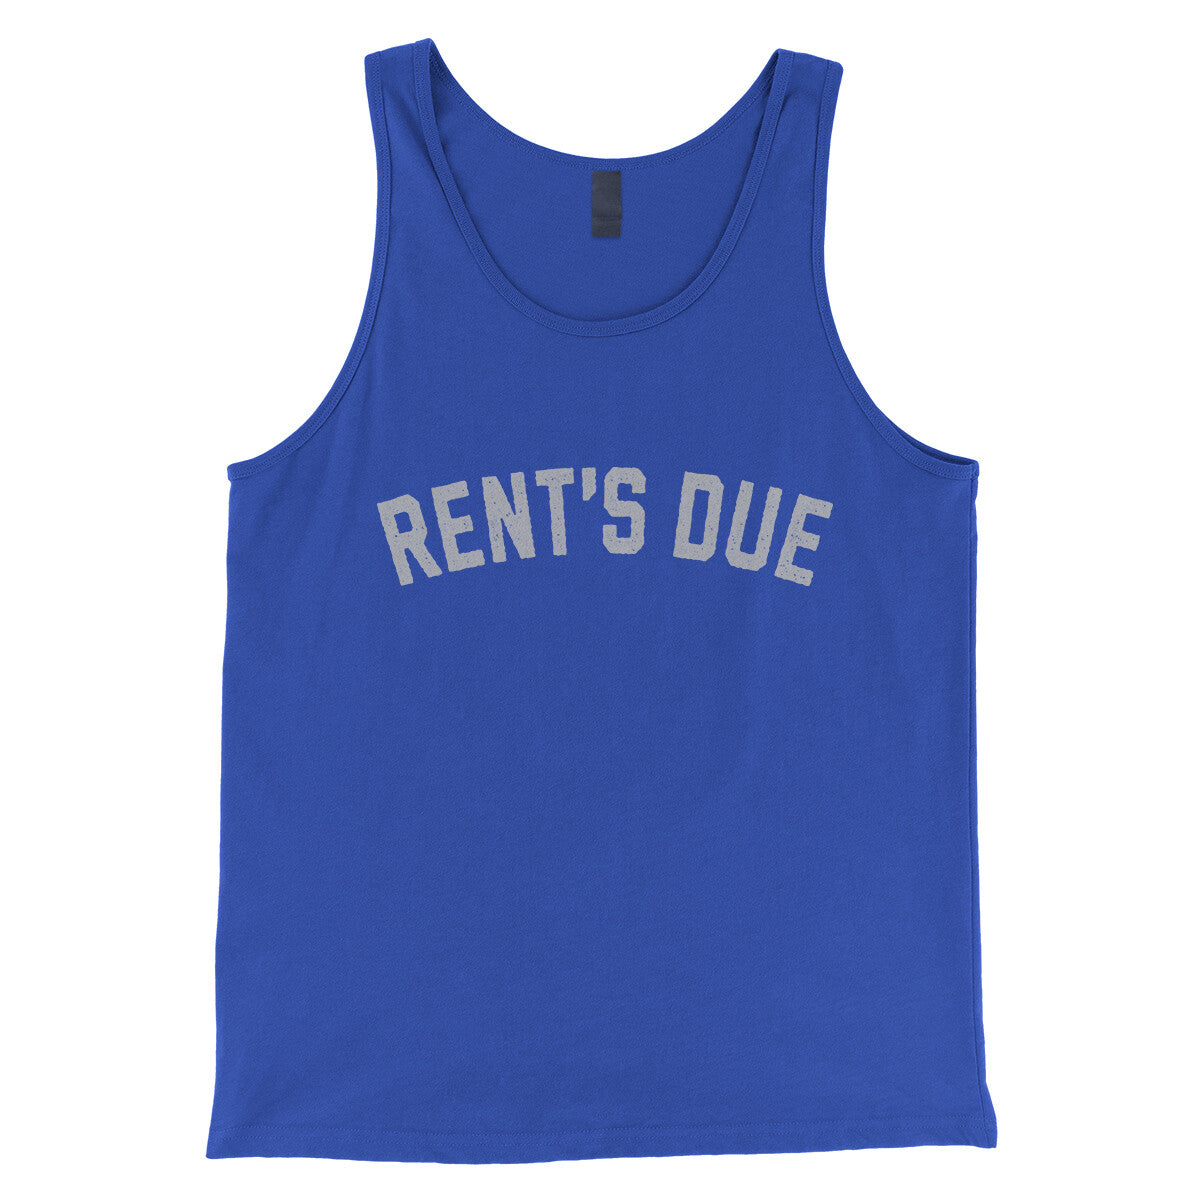 Rent's Due in True Royal Color